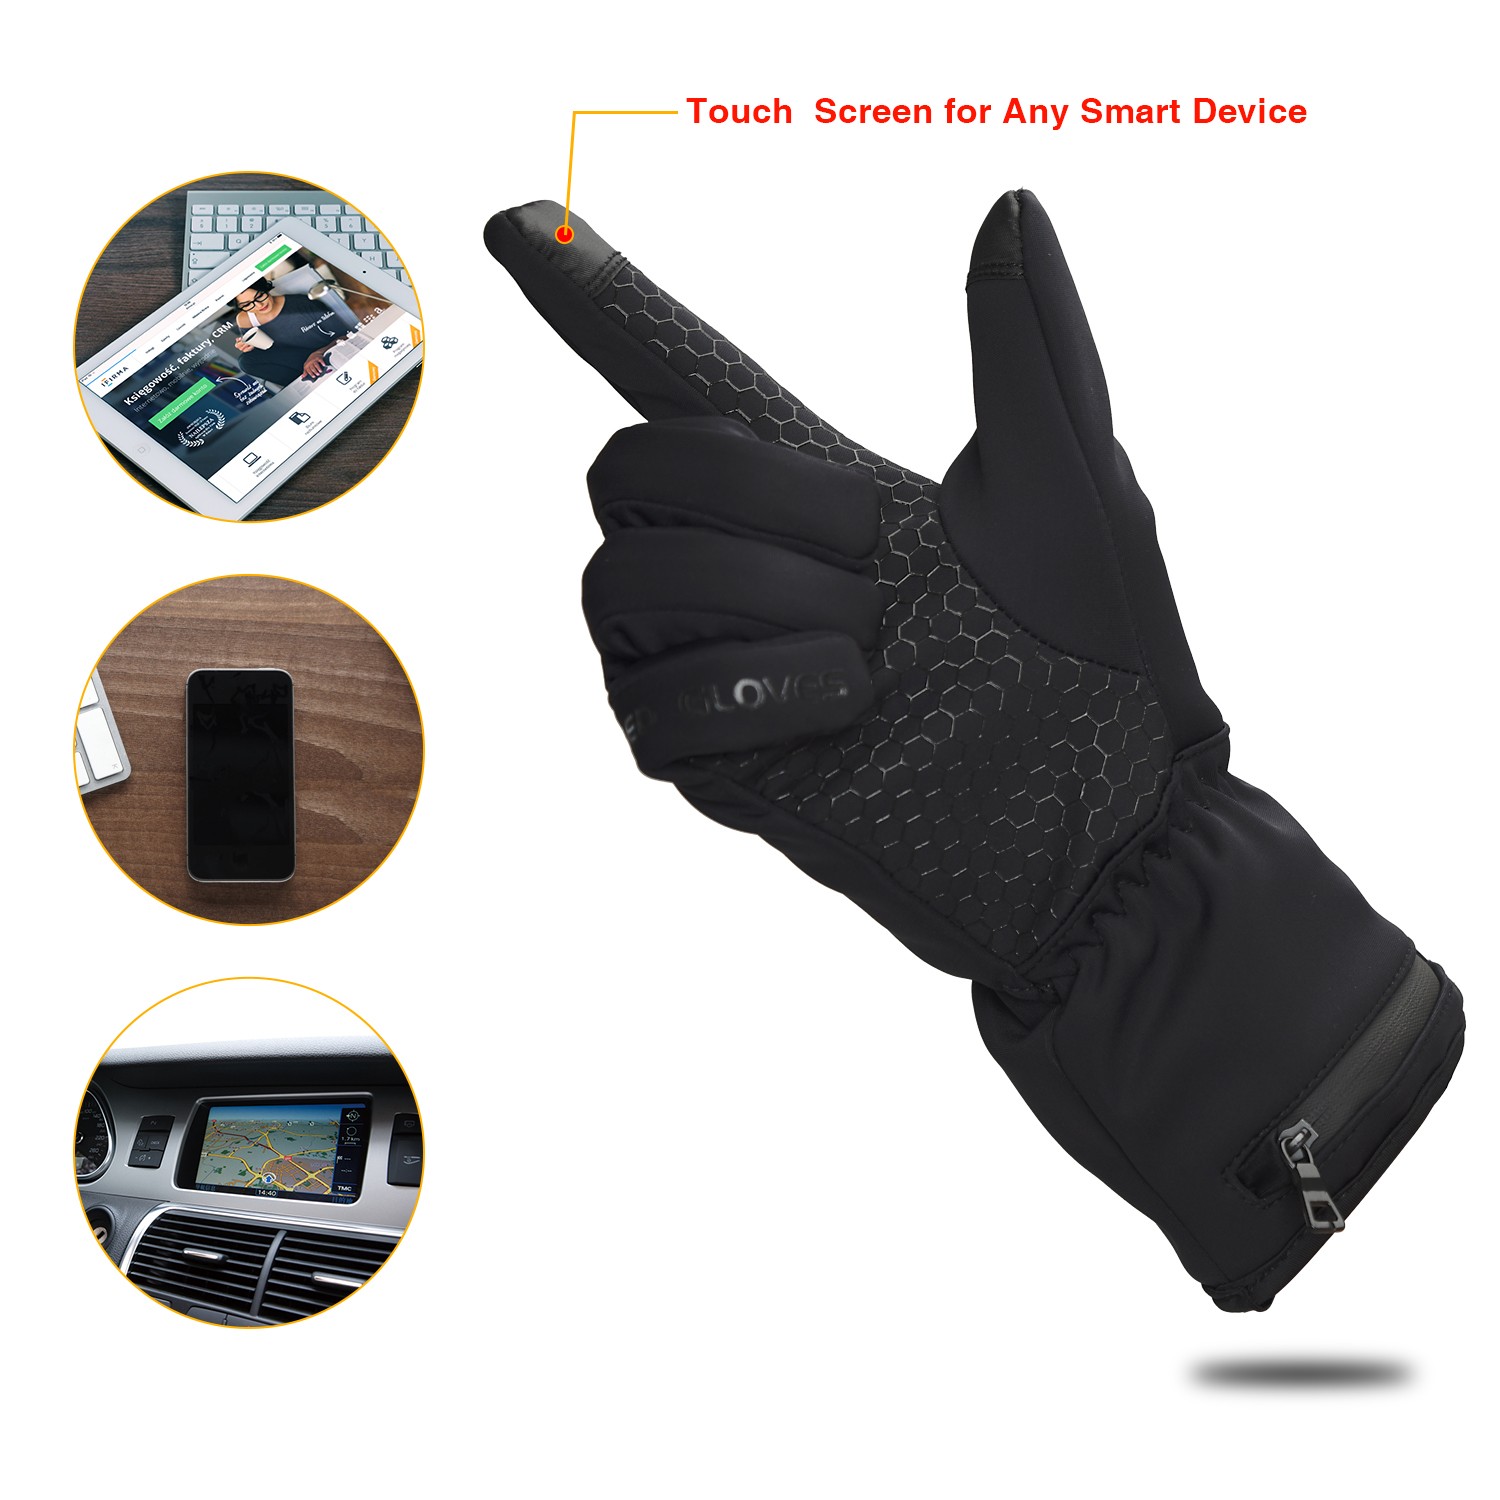 Dr. Warm high quality heated winter gloves for outdoor-8